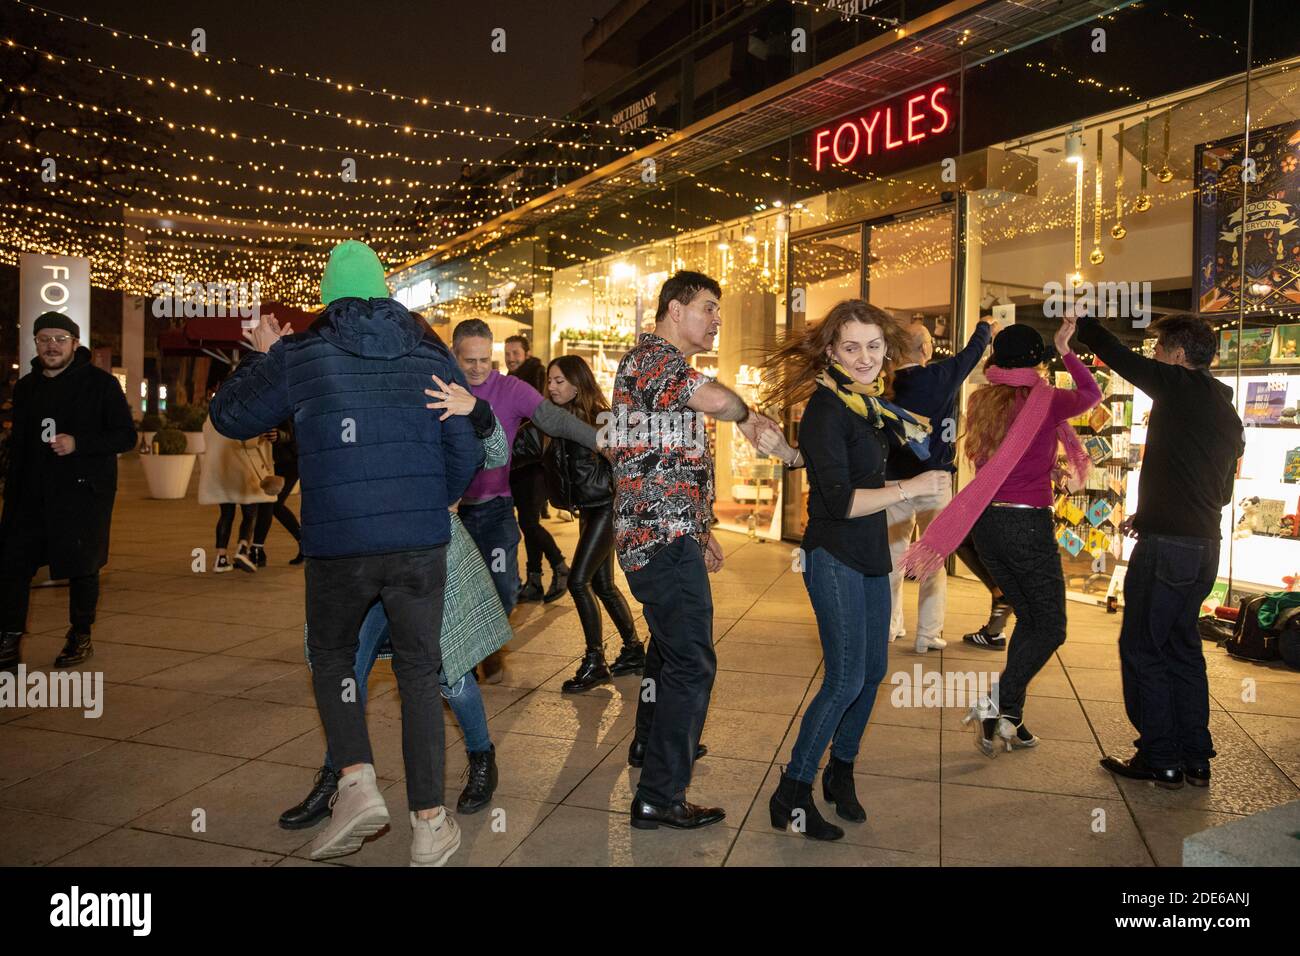 Salsa dancing, social distanced dancing outside the FOYLES bookstore along the Southbank during the coronavirus lockdown#2 restrictions, London, UK Stock Photo